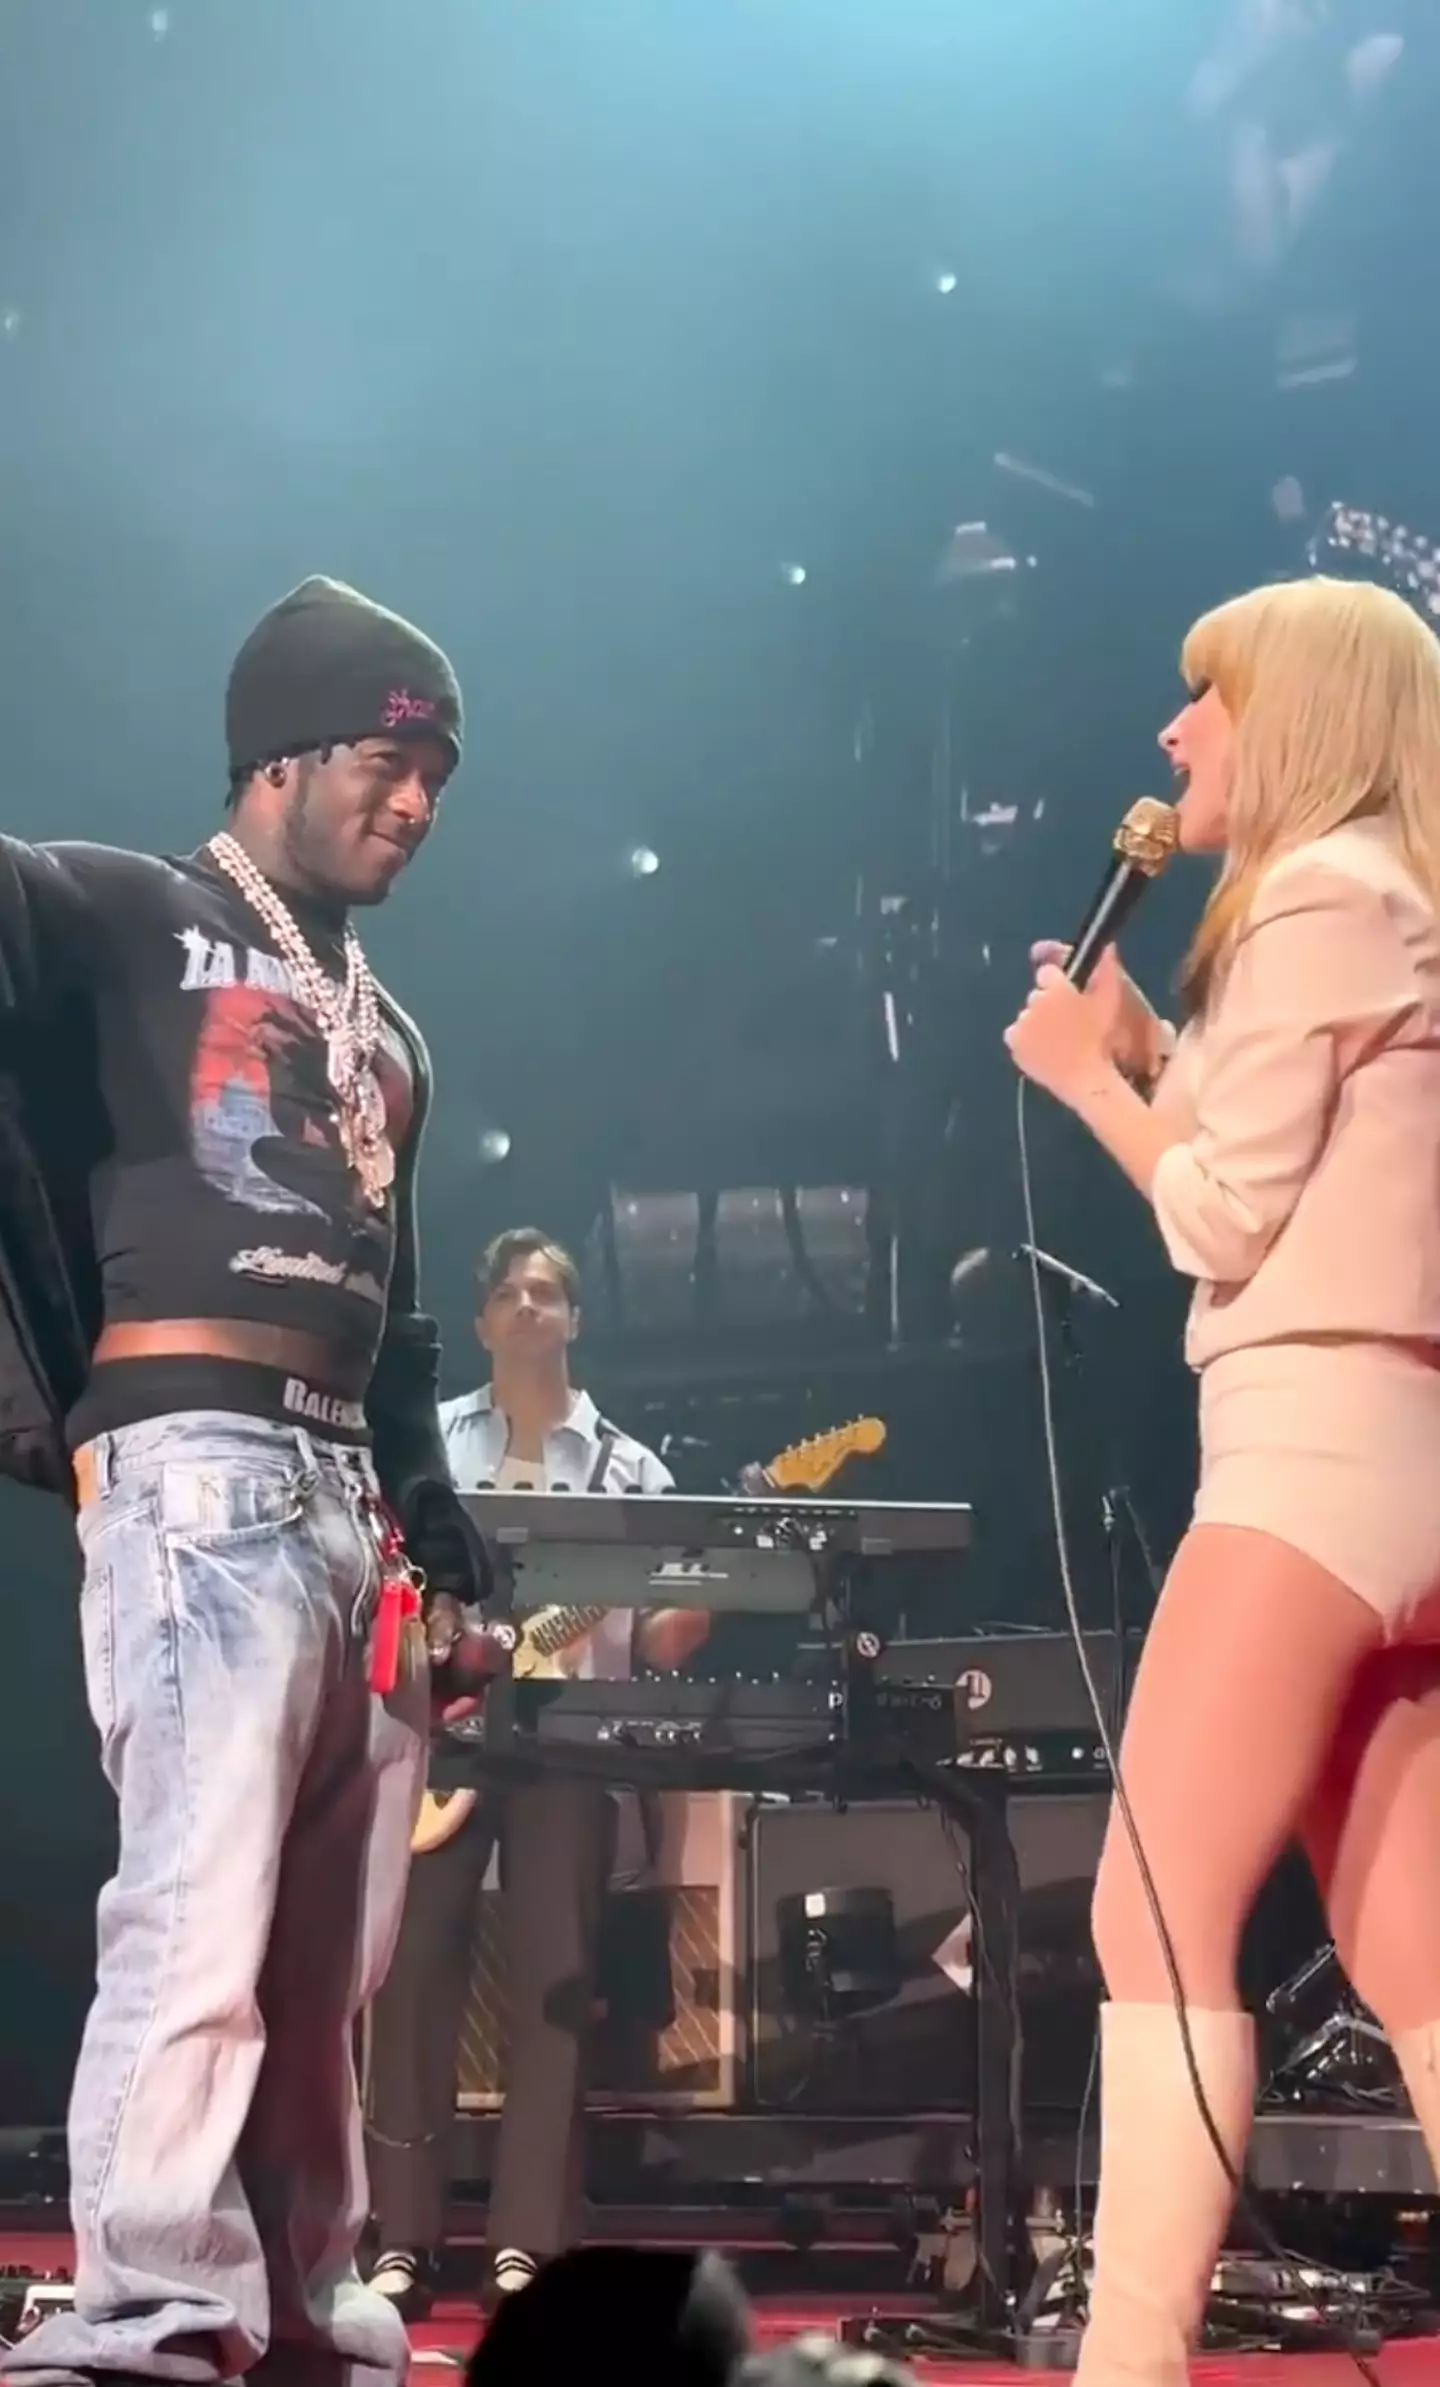 Lil Uzi Vert and Hayley Williams from Paramore sang together on stage.